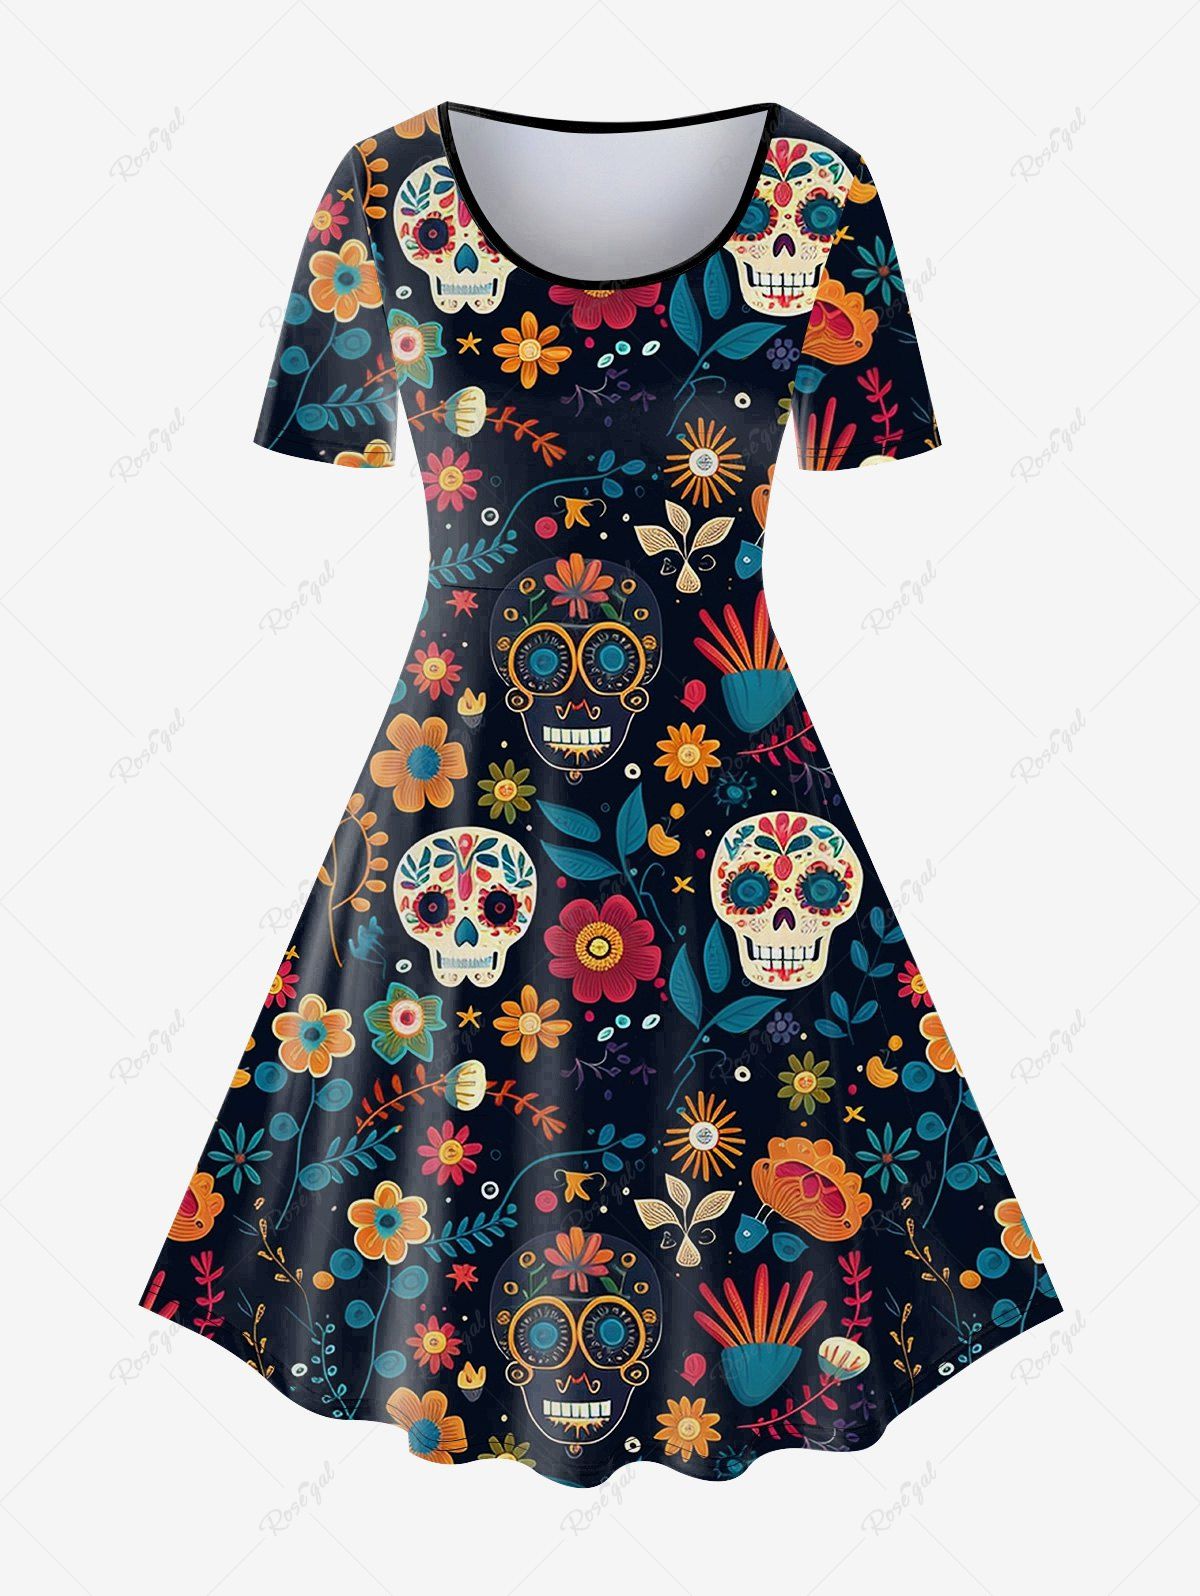 New Gothic Skull Allover Print A Line Tee Dress  